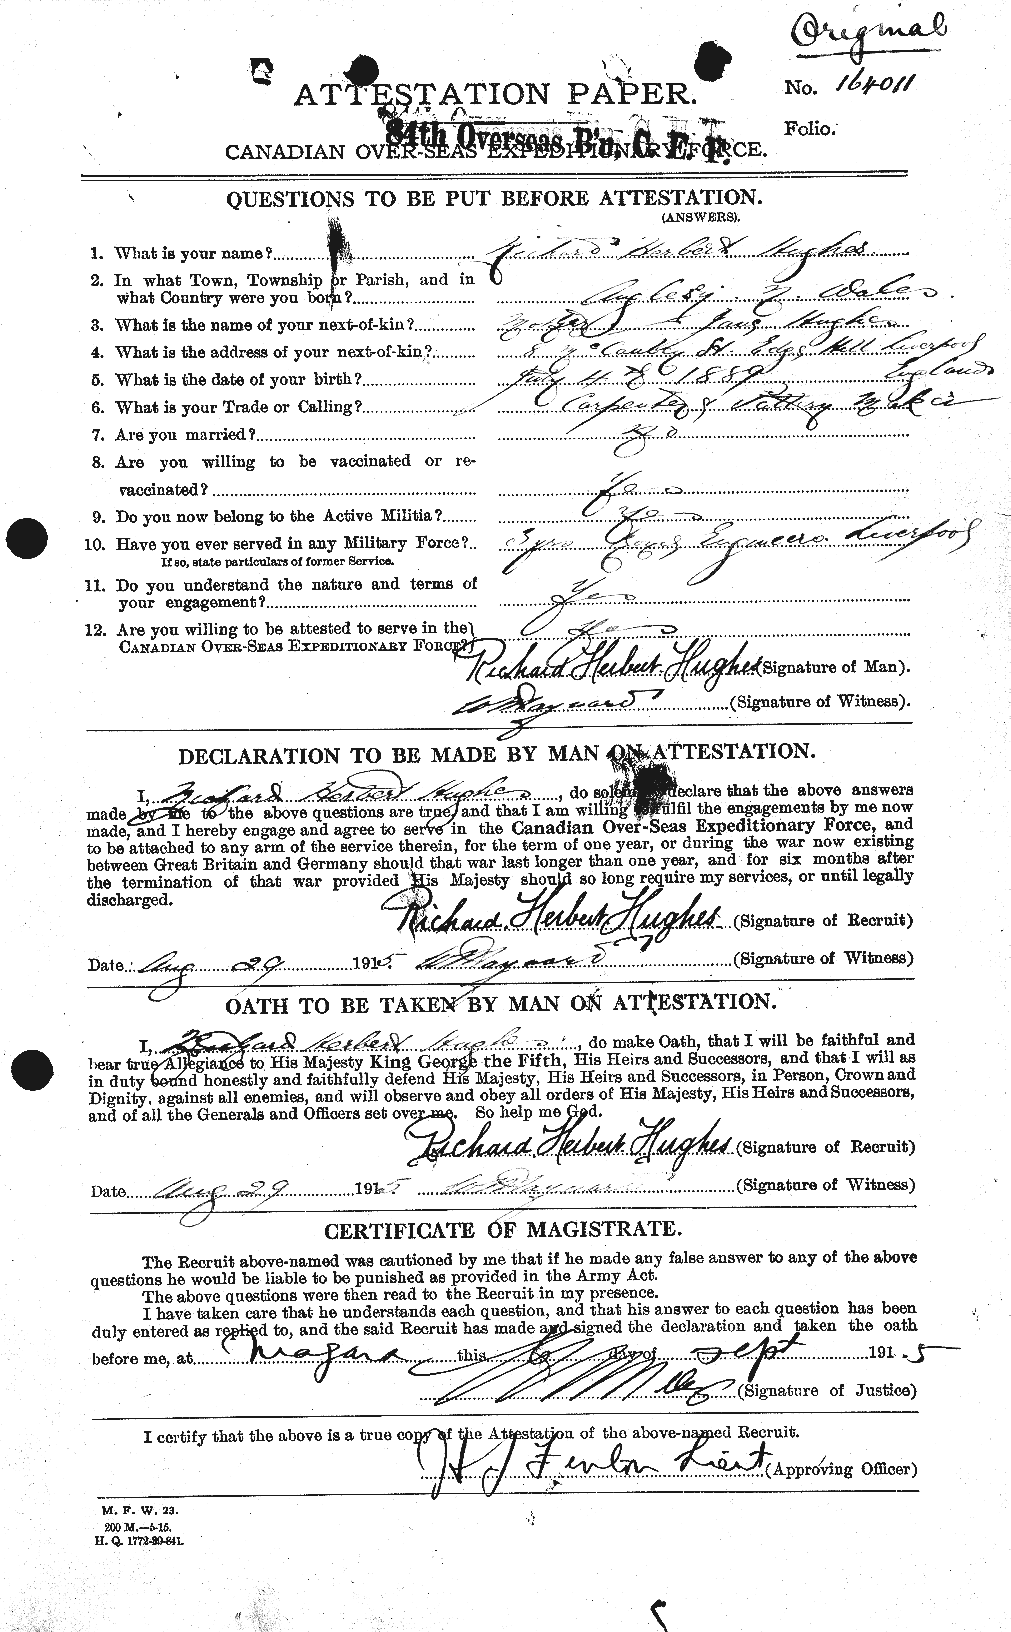 Personnel Records of the First World War - CEF 404190a